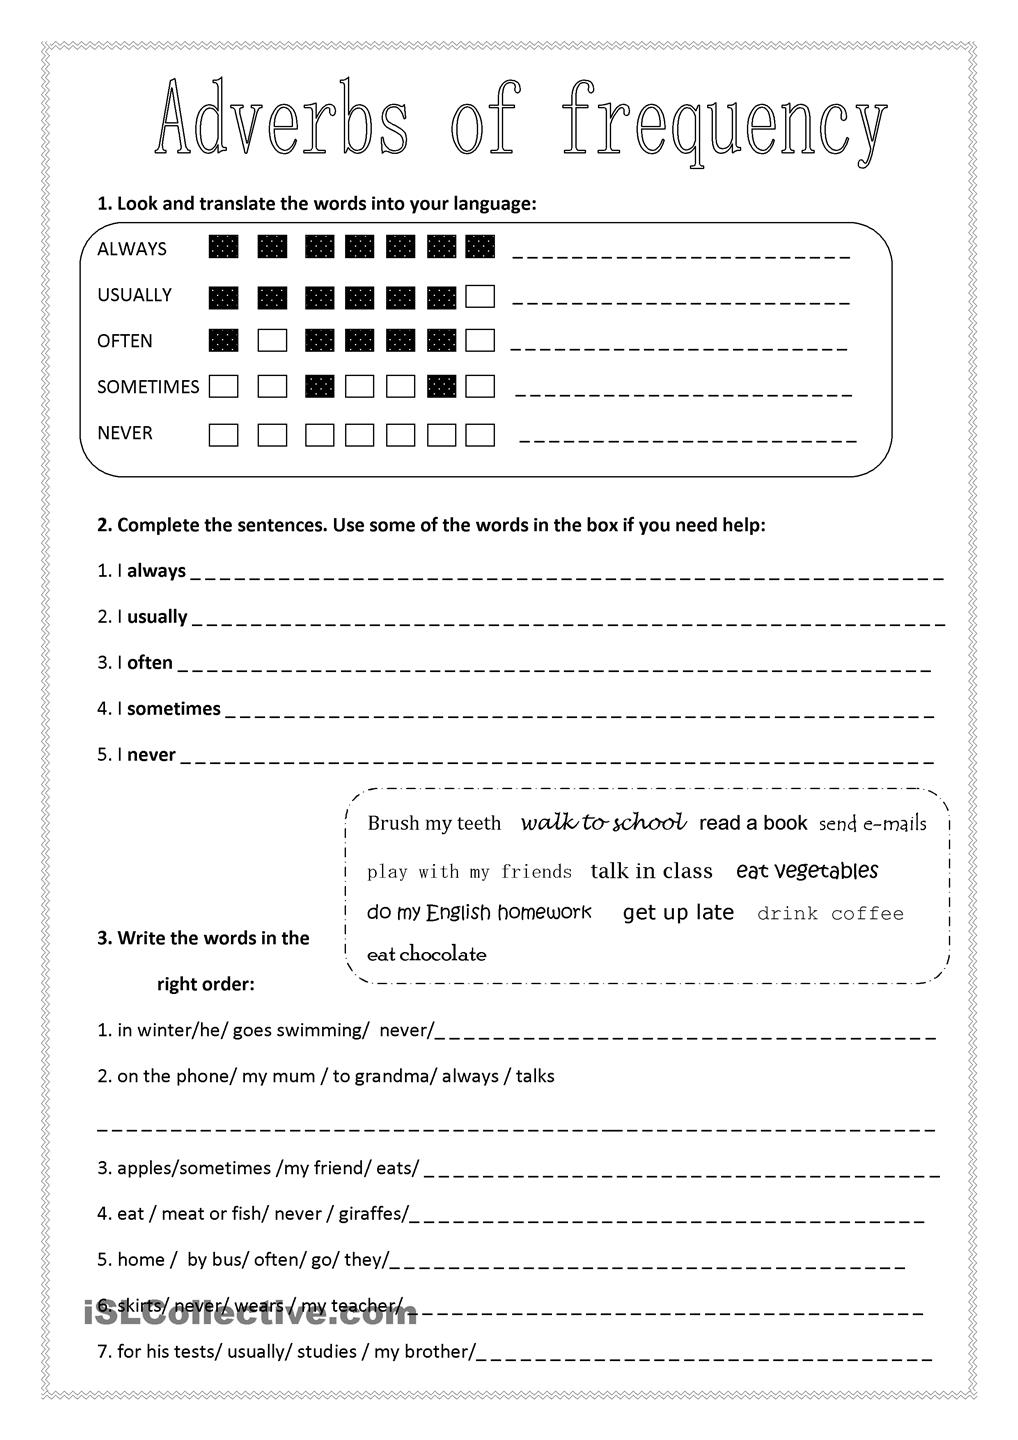 adverbs-of-frequency-worksheets-frequency-adverbs-free-exercise-lydia-barnett